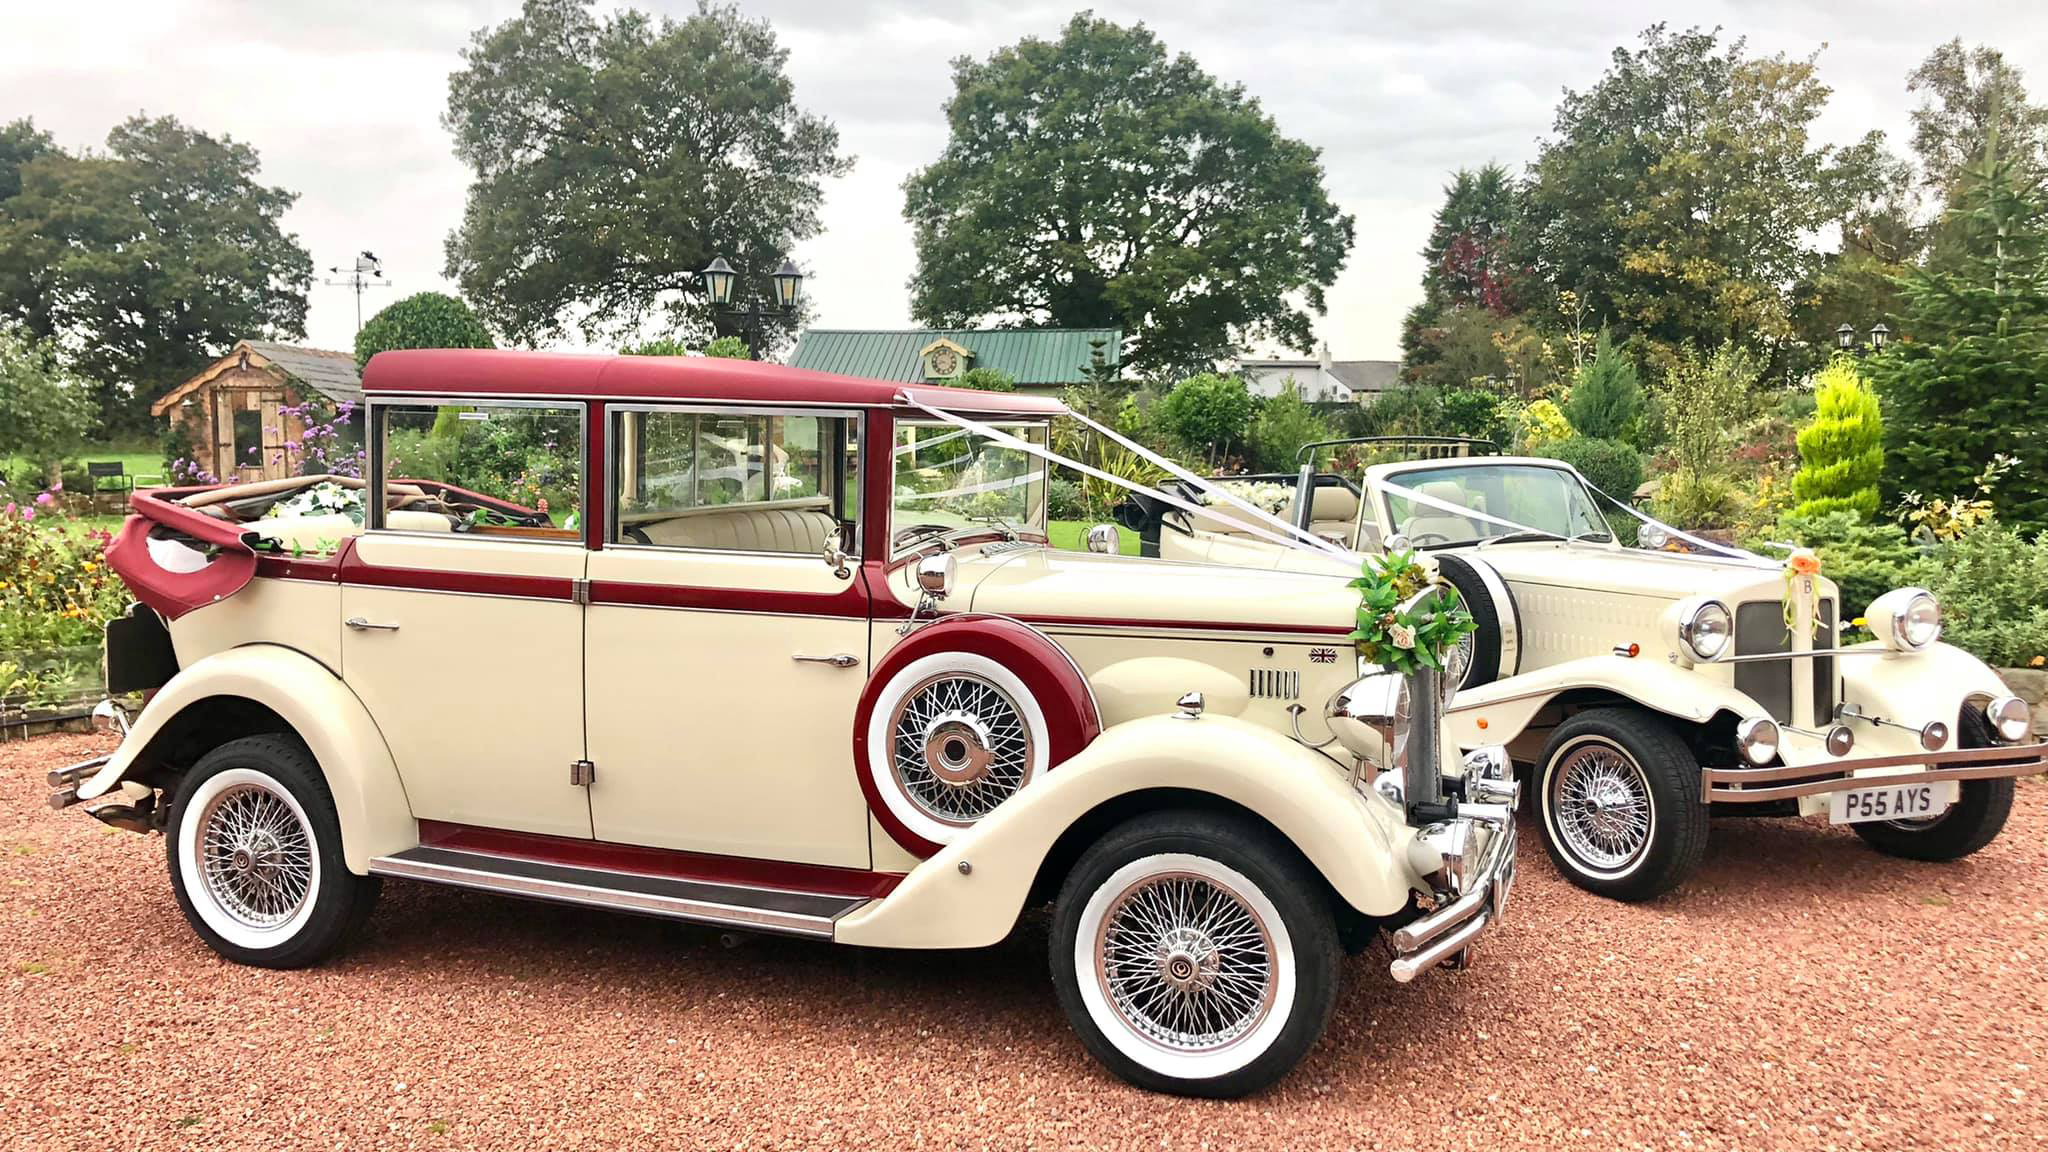 Two vintage wedding cars decorated with white ribbons at a local Chester wedding. Both vehicles are parked side-by-side